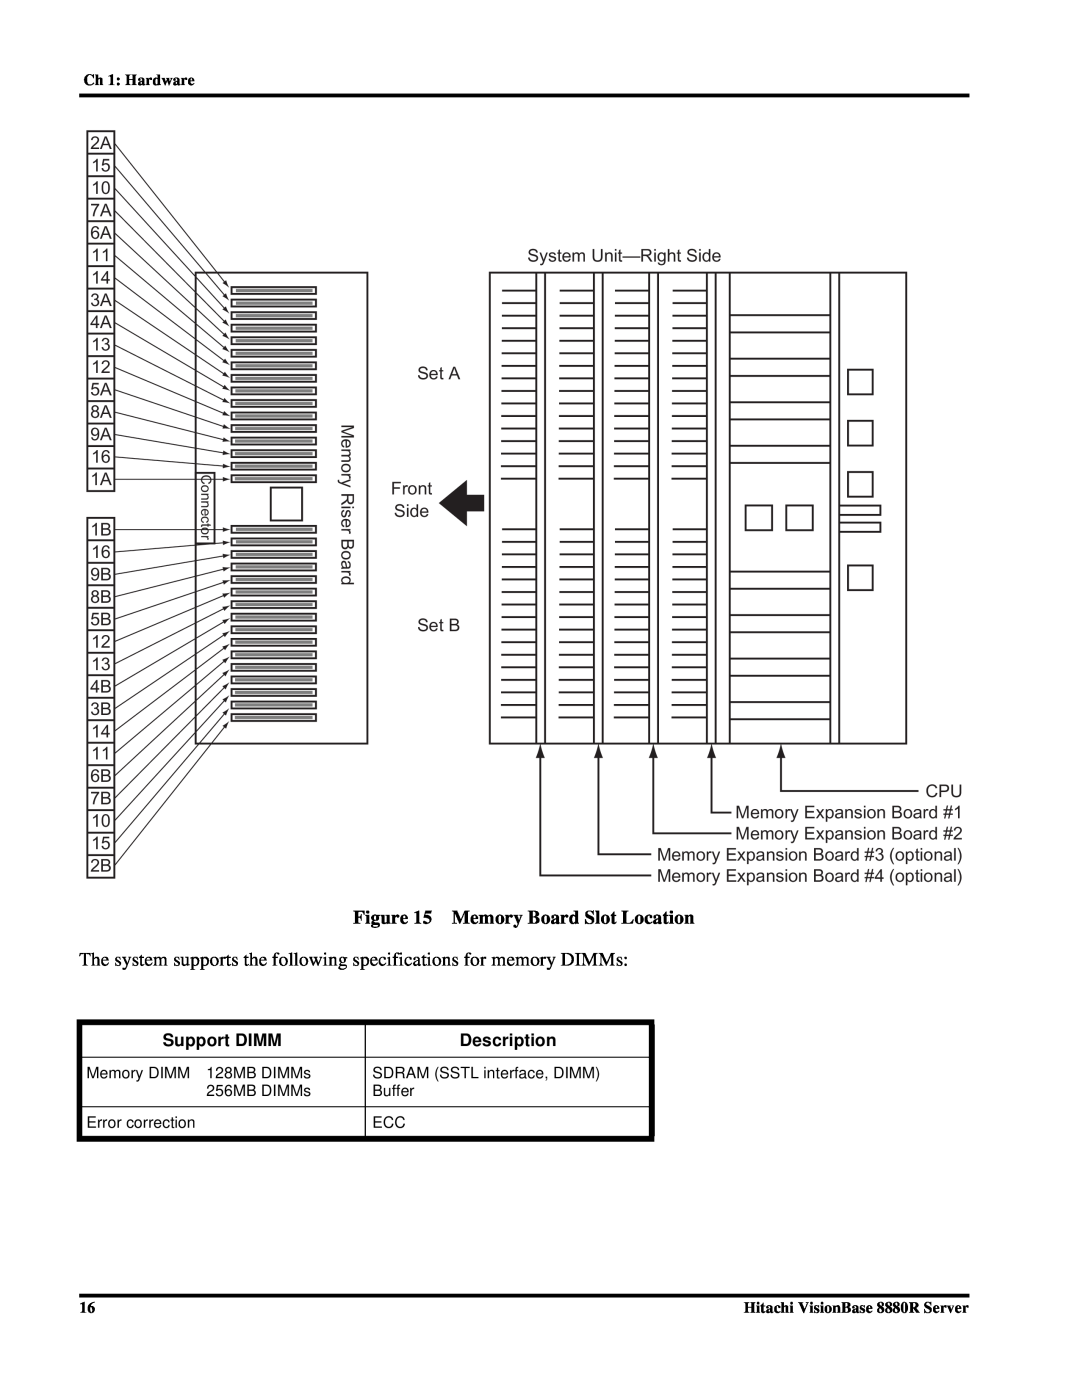 Hitachi 8880R manual Memory Board Slot Location, The system supports the following specifications for memory DIMMs 